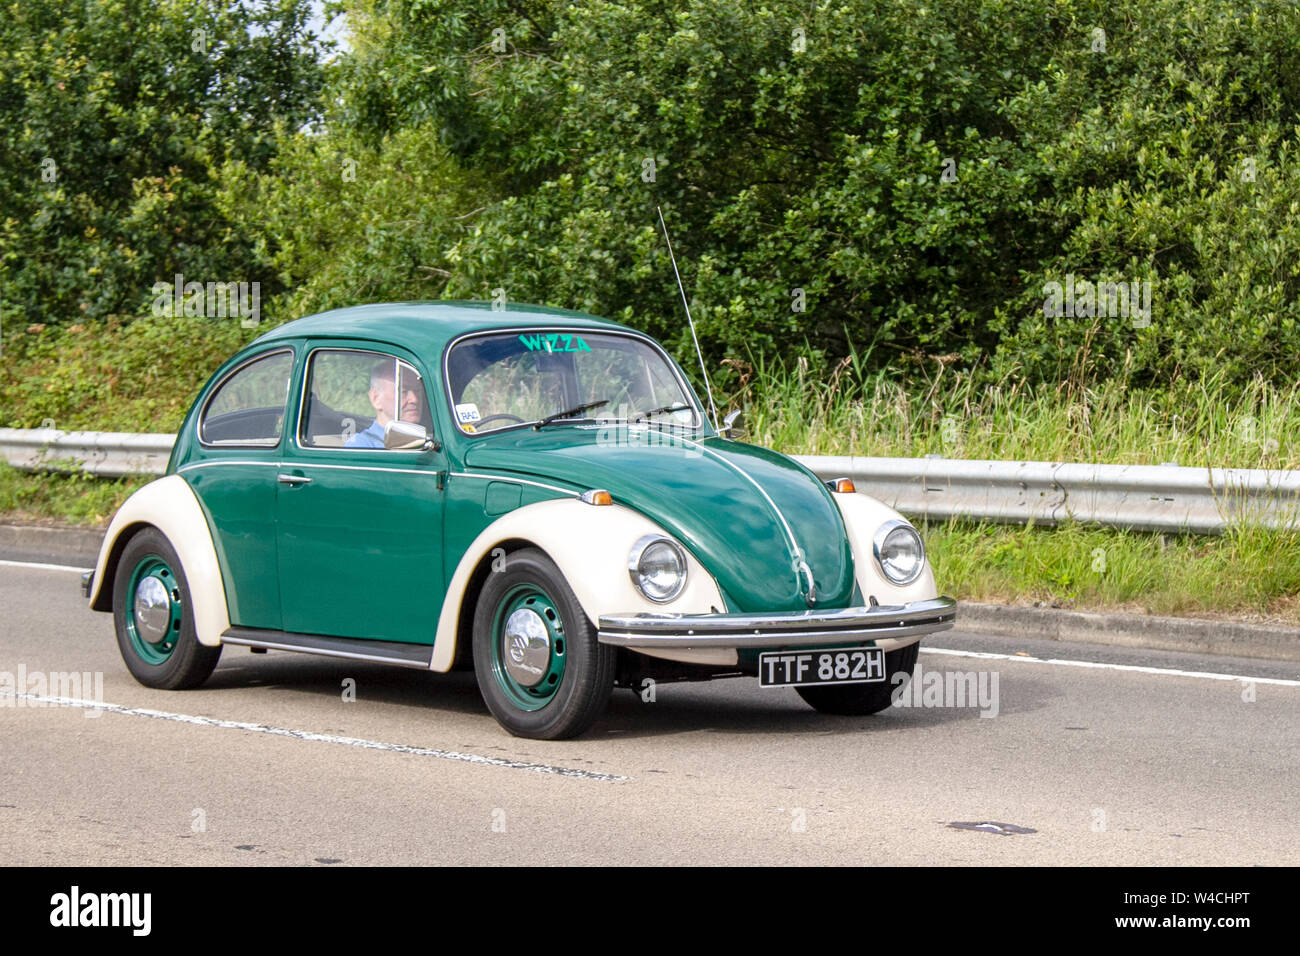 1969 60s green white old type VW Volkswagen 1500,  Käfer, Vocho, Fusca, Cocinelle, Maggiolino, Punch Buggy, People’s Car, air-cooled, rear-engined, rear-wheel-drive compact car. Vehicular traffic, moving vehicles, cars, vehicle driving on UK roads. Stock Photo